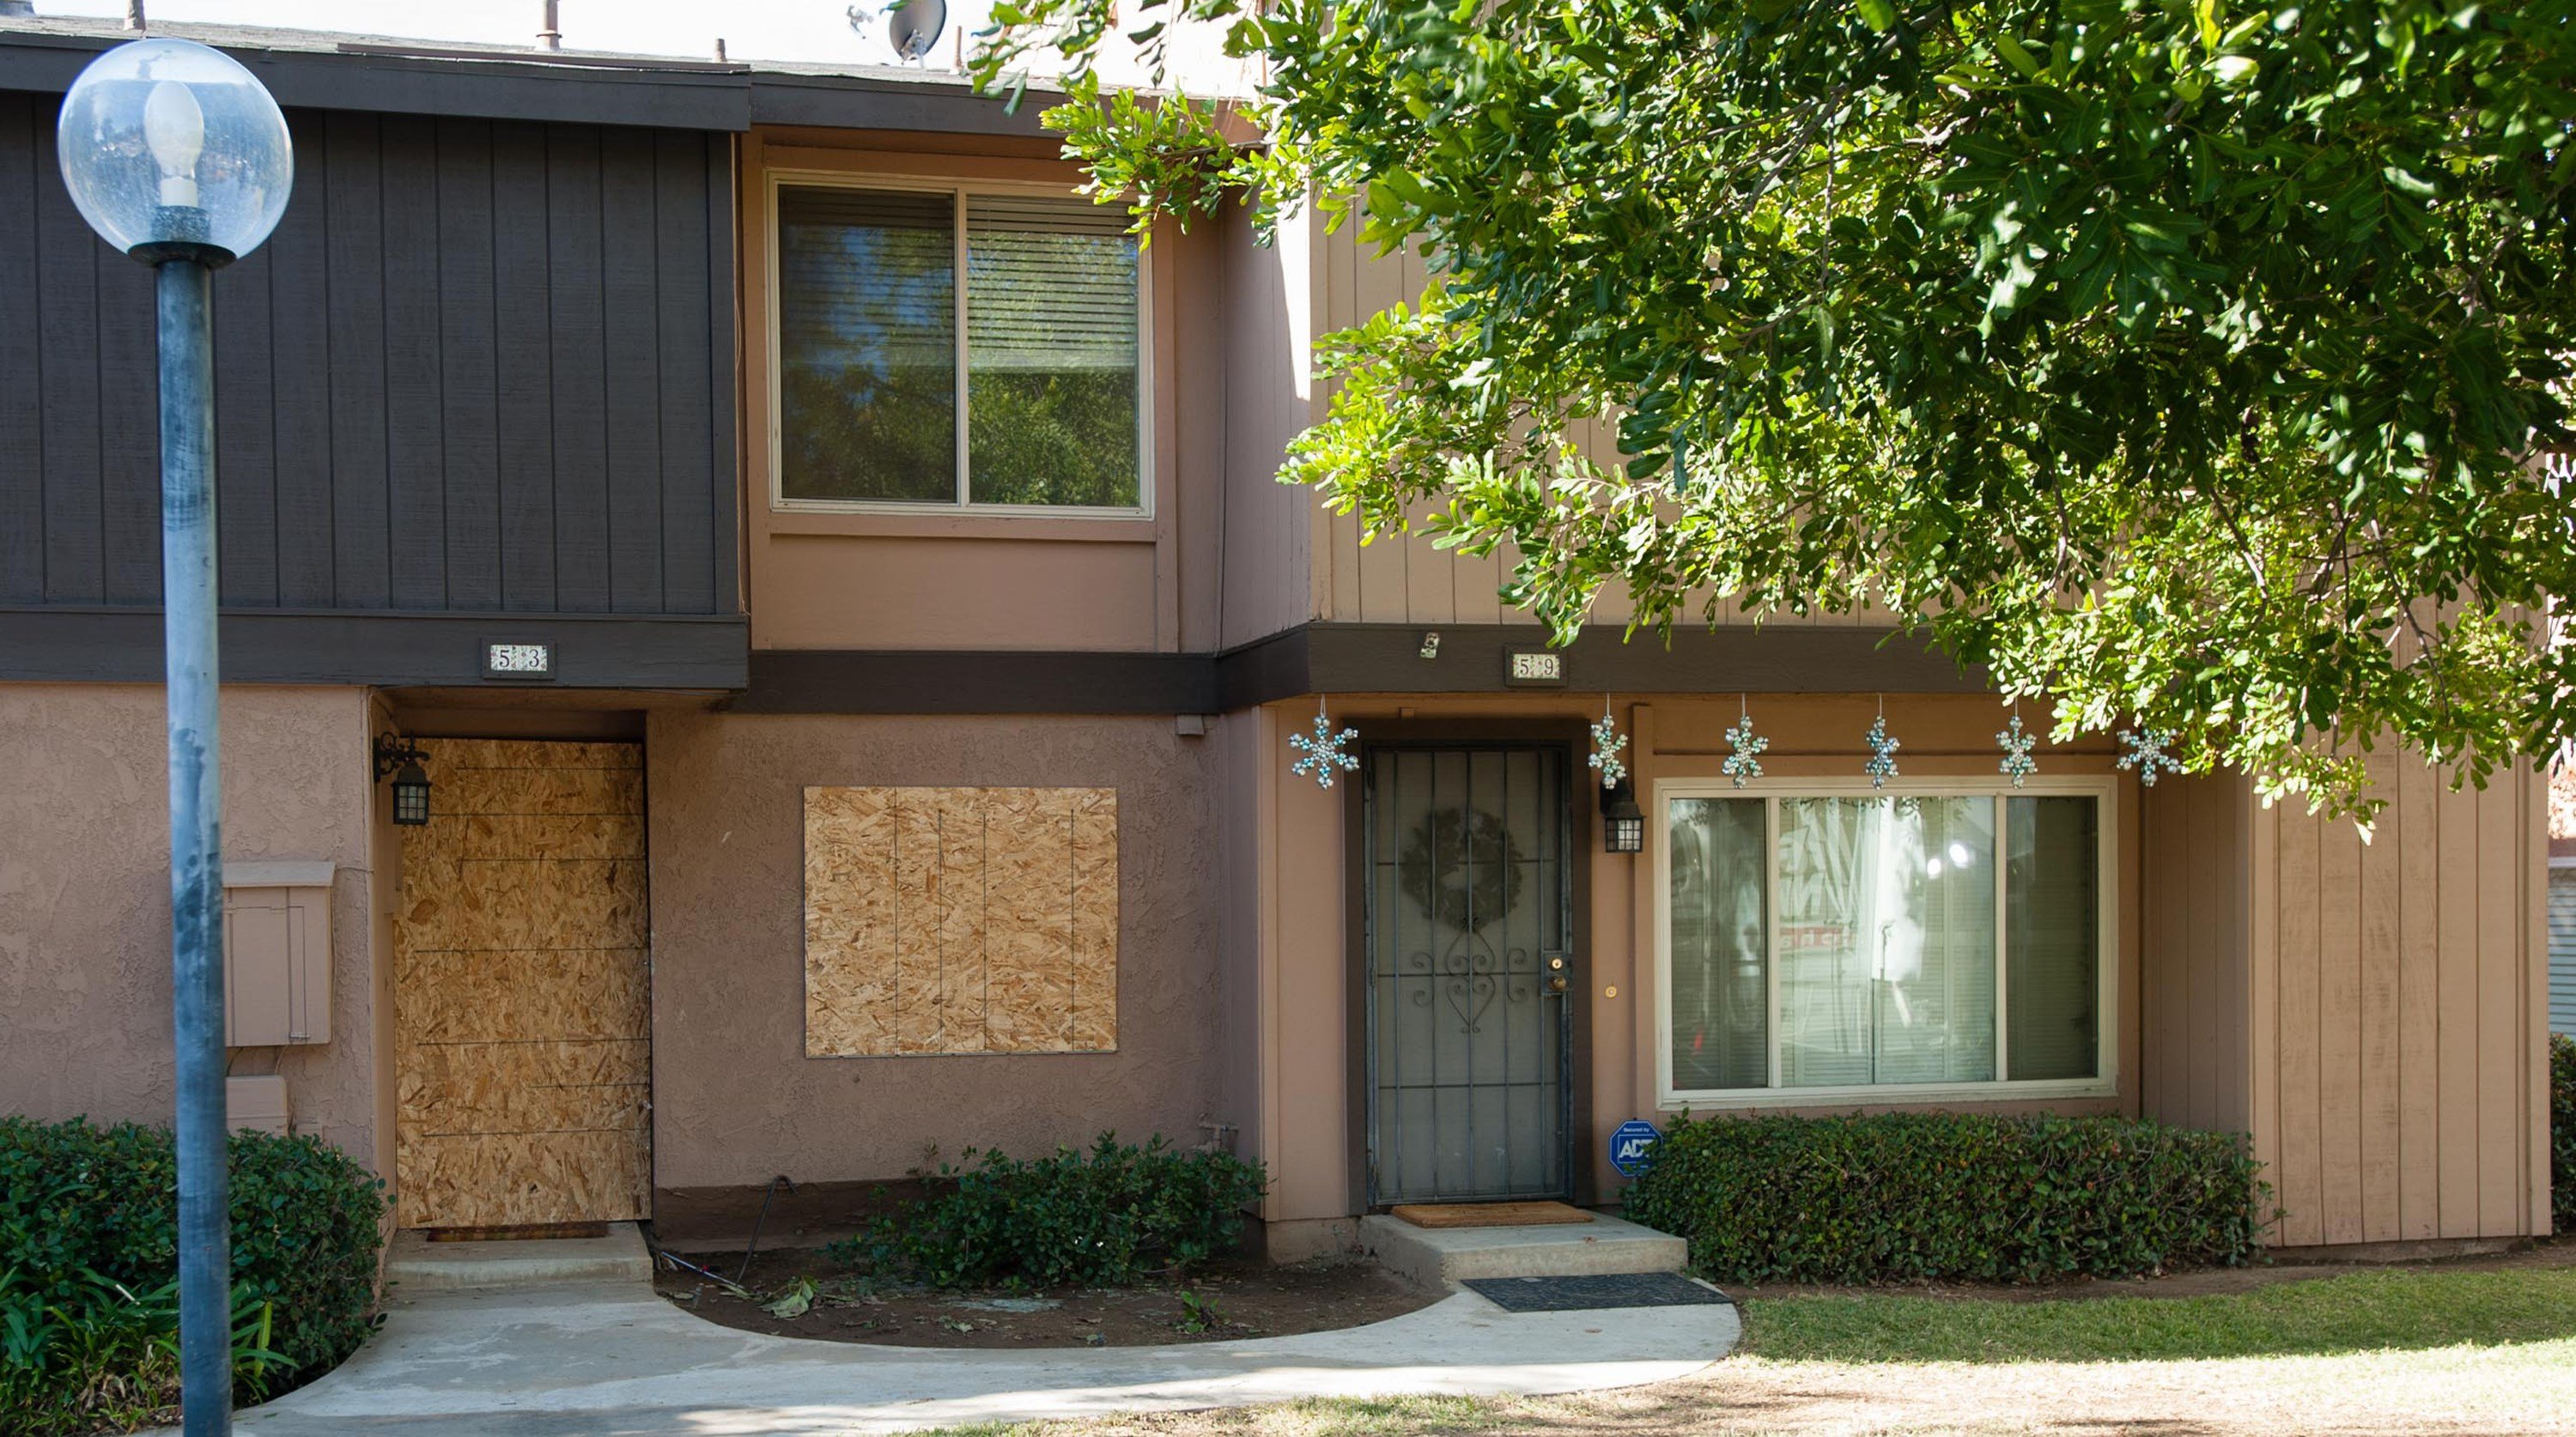 The rented Center Street townhouse of Syed Rizwan Farook and his wife, Tashfeen Malik, is boarded up as holiday decorations and a wreath adorn a neighboring residence on December 5, 2015, in Redlands, CA. (Greg Vojtko—AFP/Getty Images)